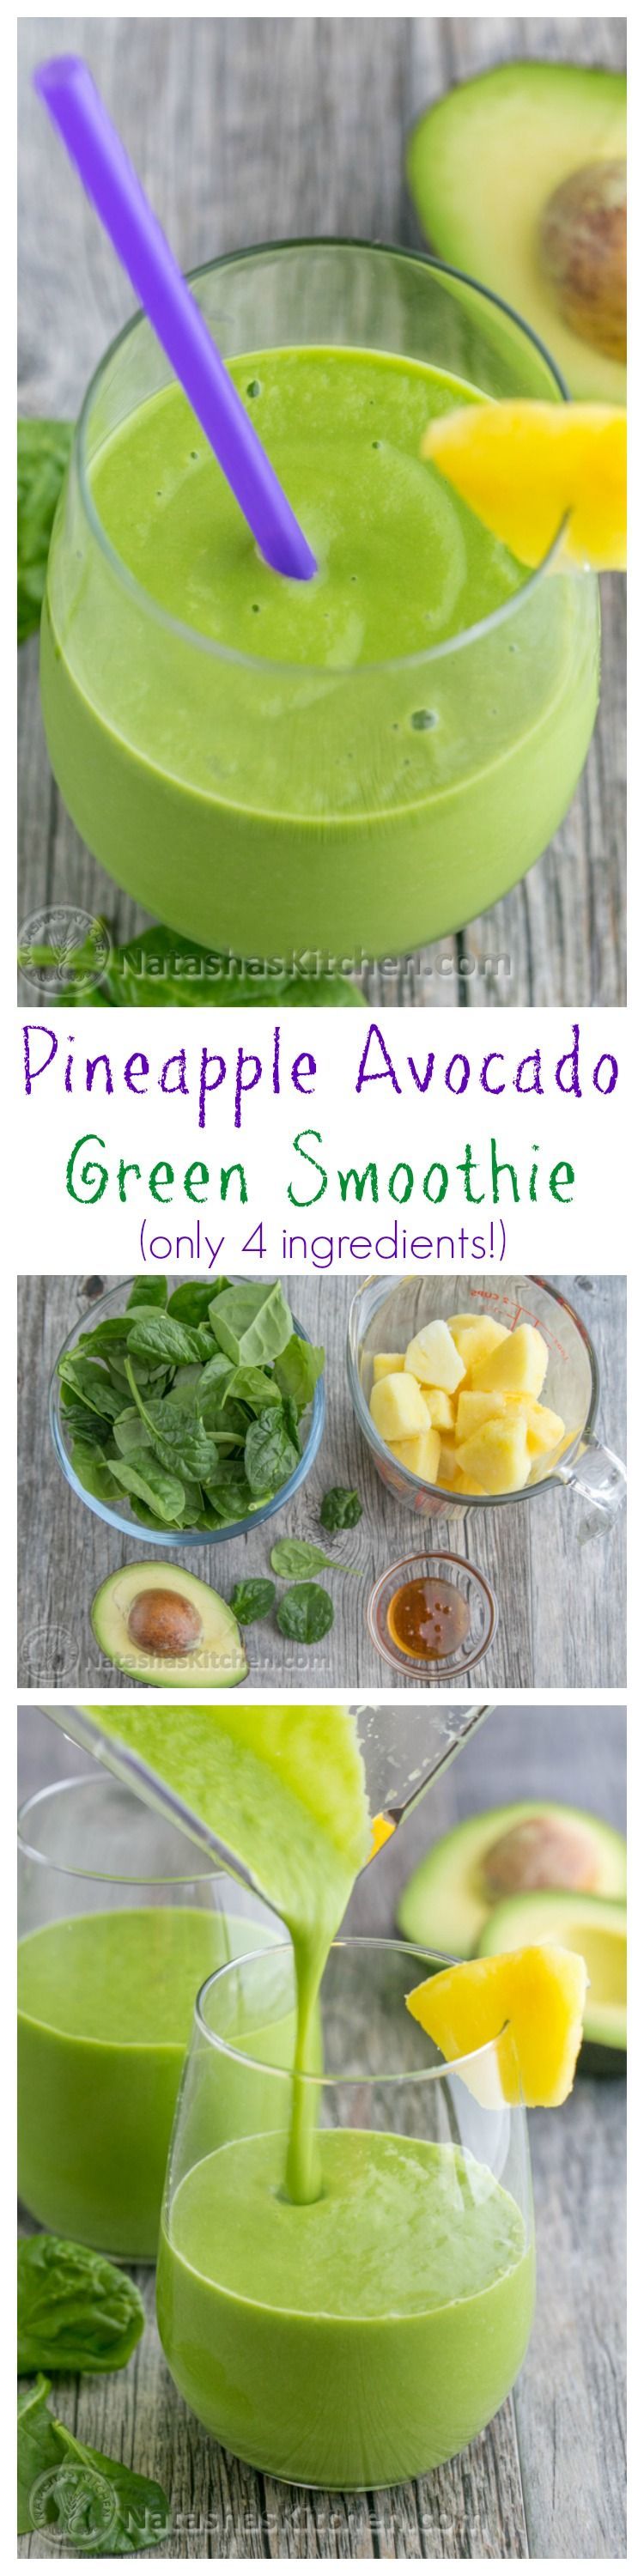 This pineapple avocado green smoothie is delicious, nutritious, energy boosting…